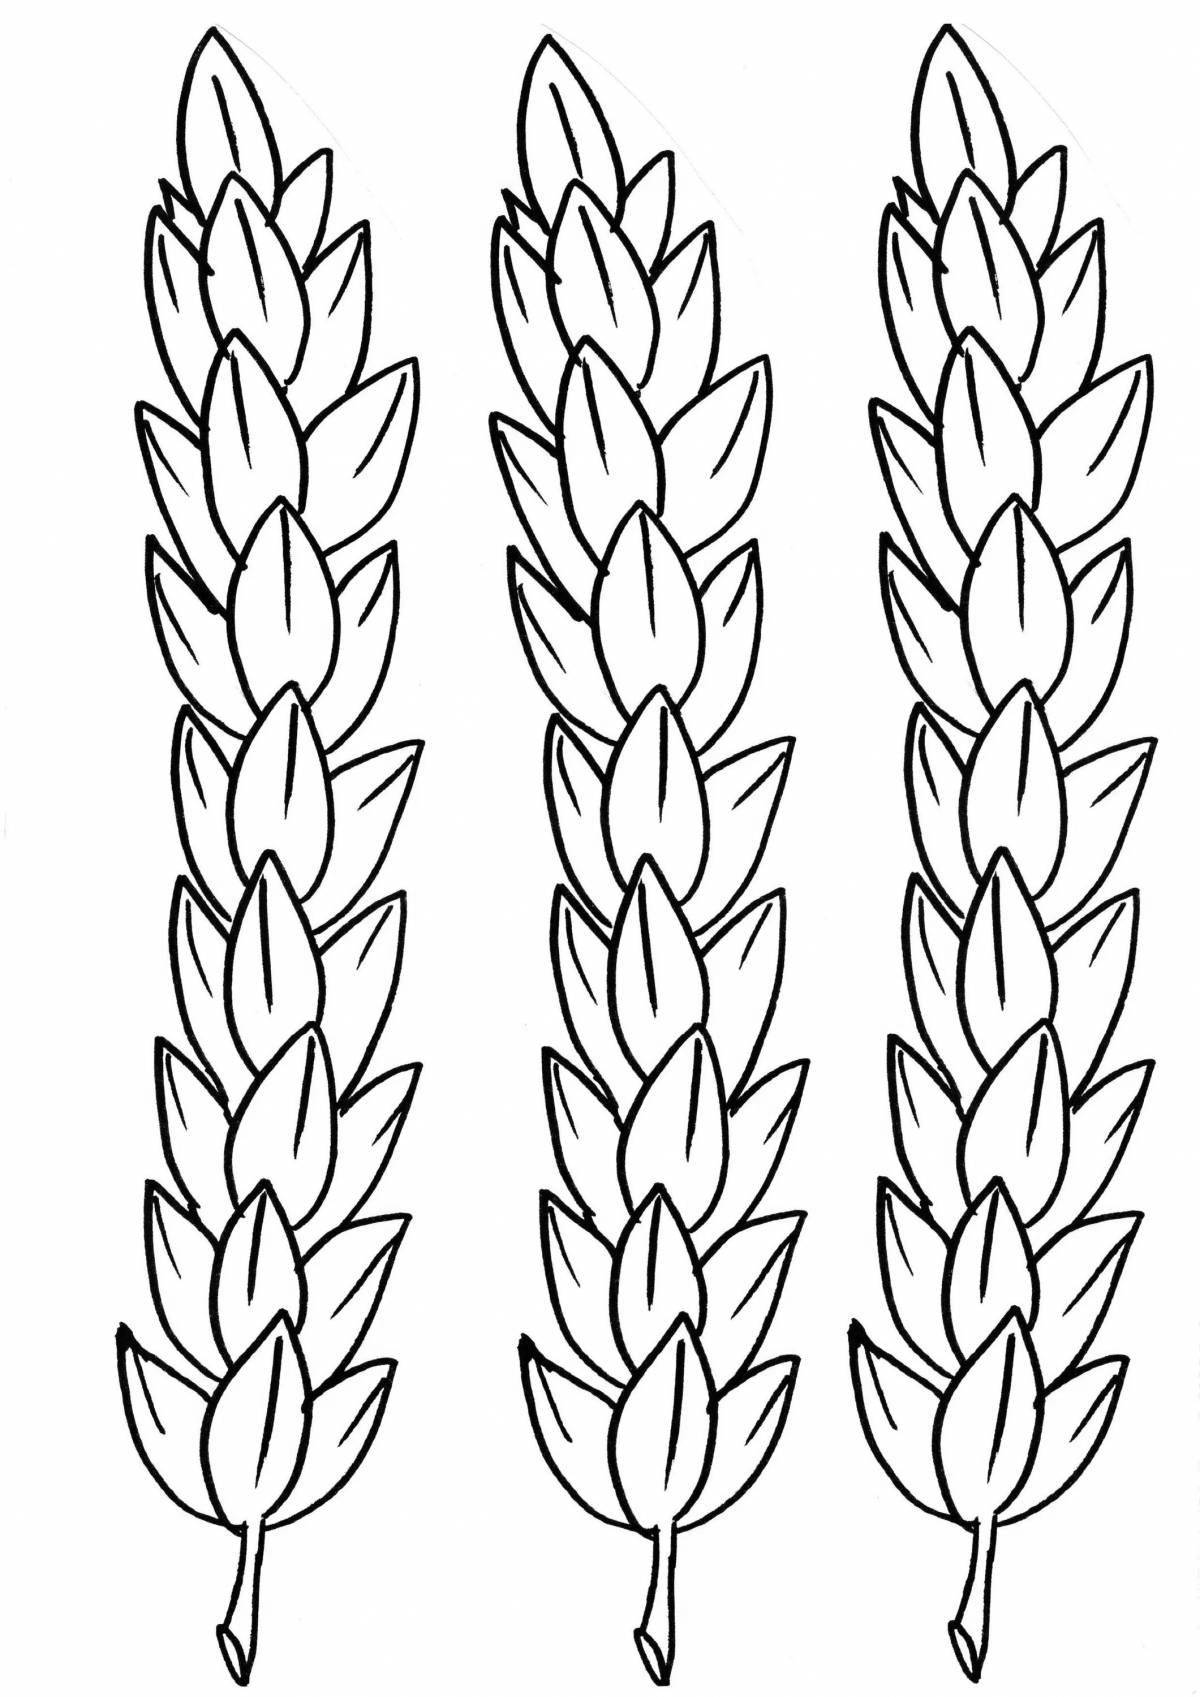 Wonderful spikelet coloring for kids